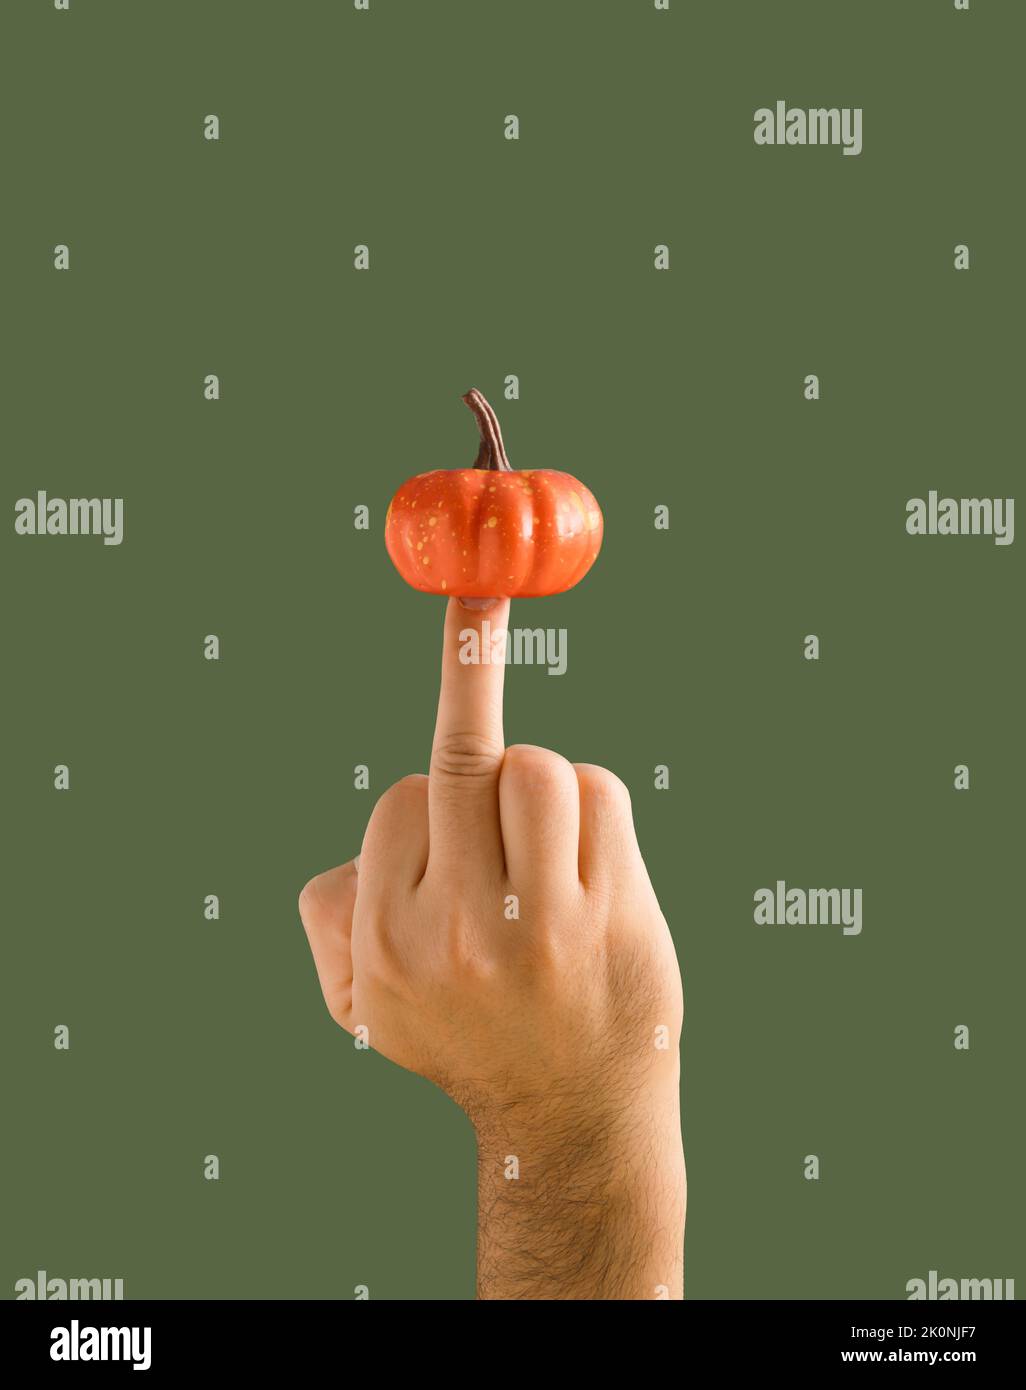 Hand shows aggresive gesture with the middle finger and pumpkin on dark green background. Autumn colors. Seasonal background. Stock Photo